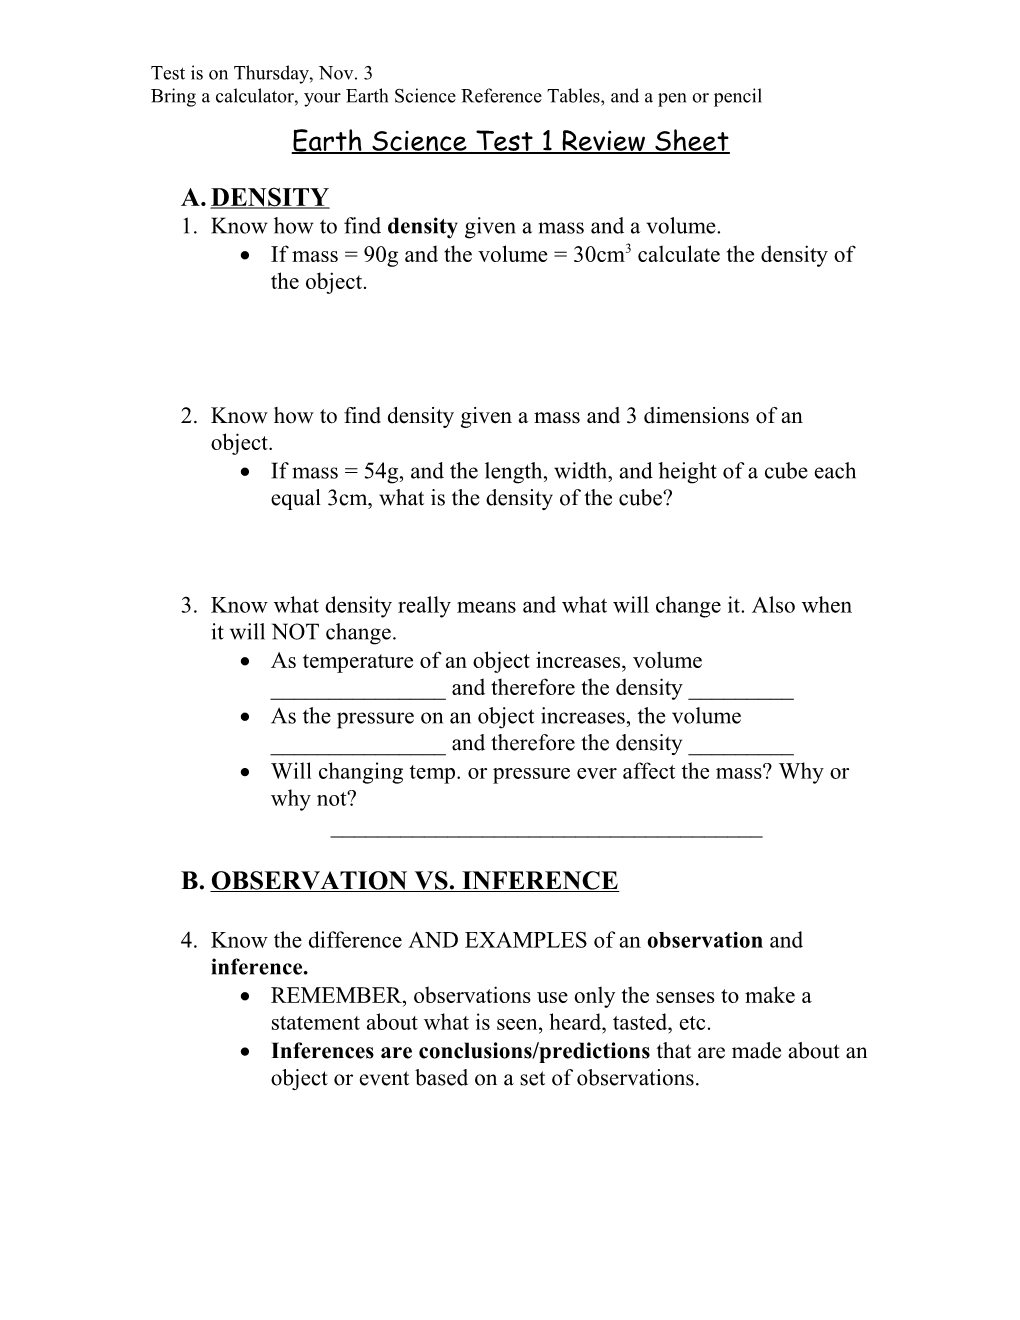 Earth Science Test 1 Review Sheet